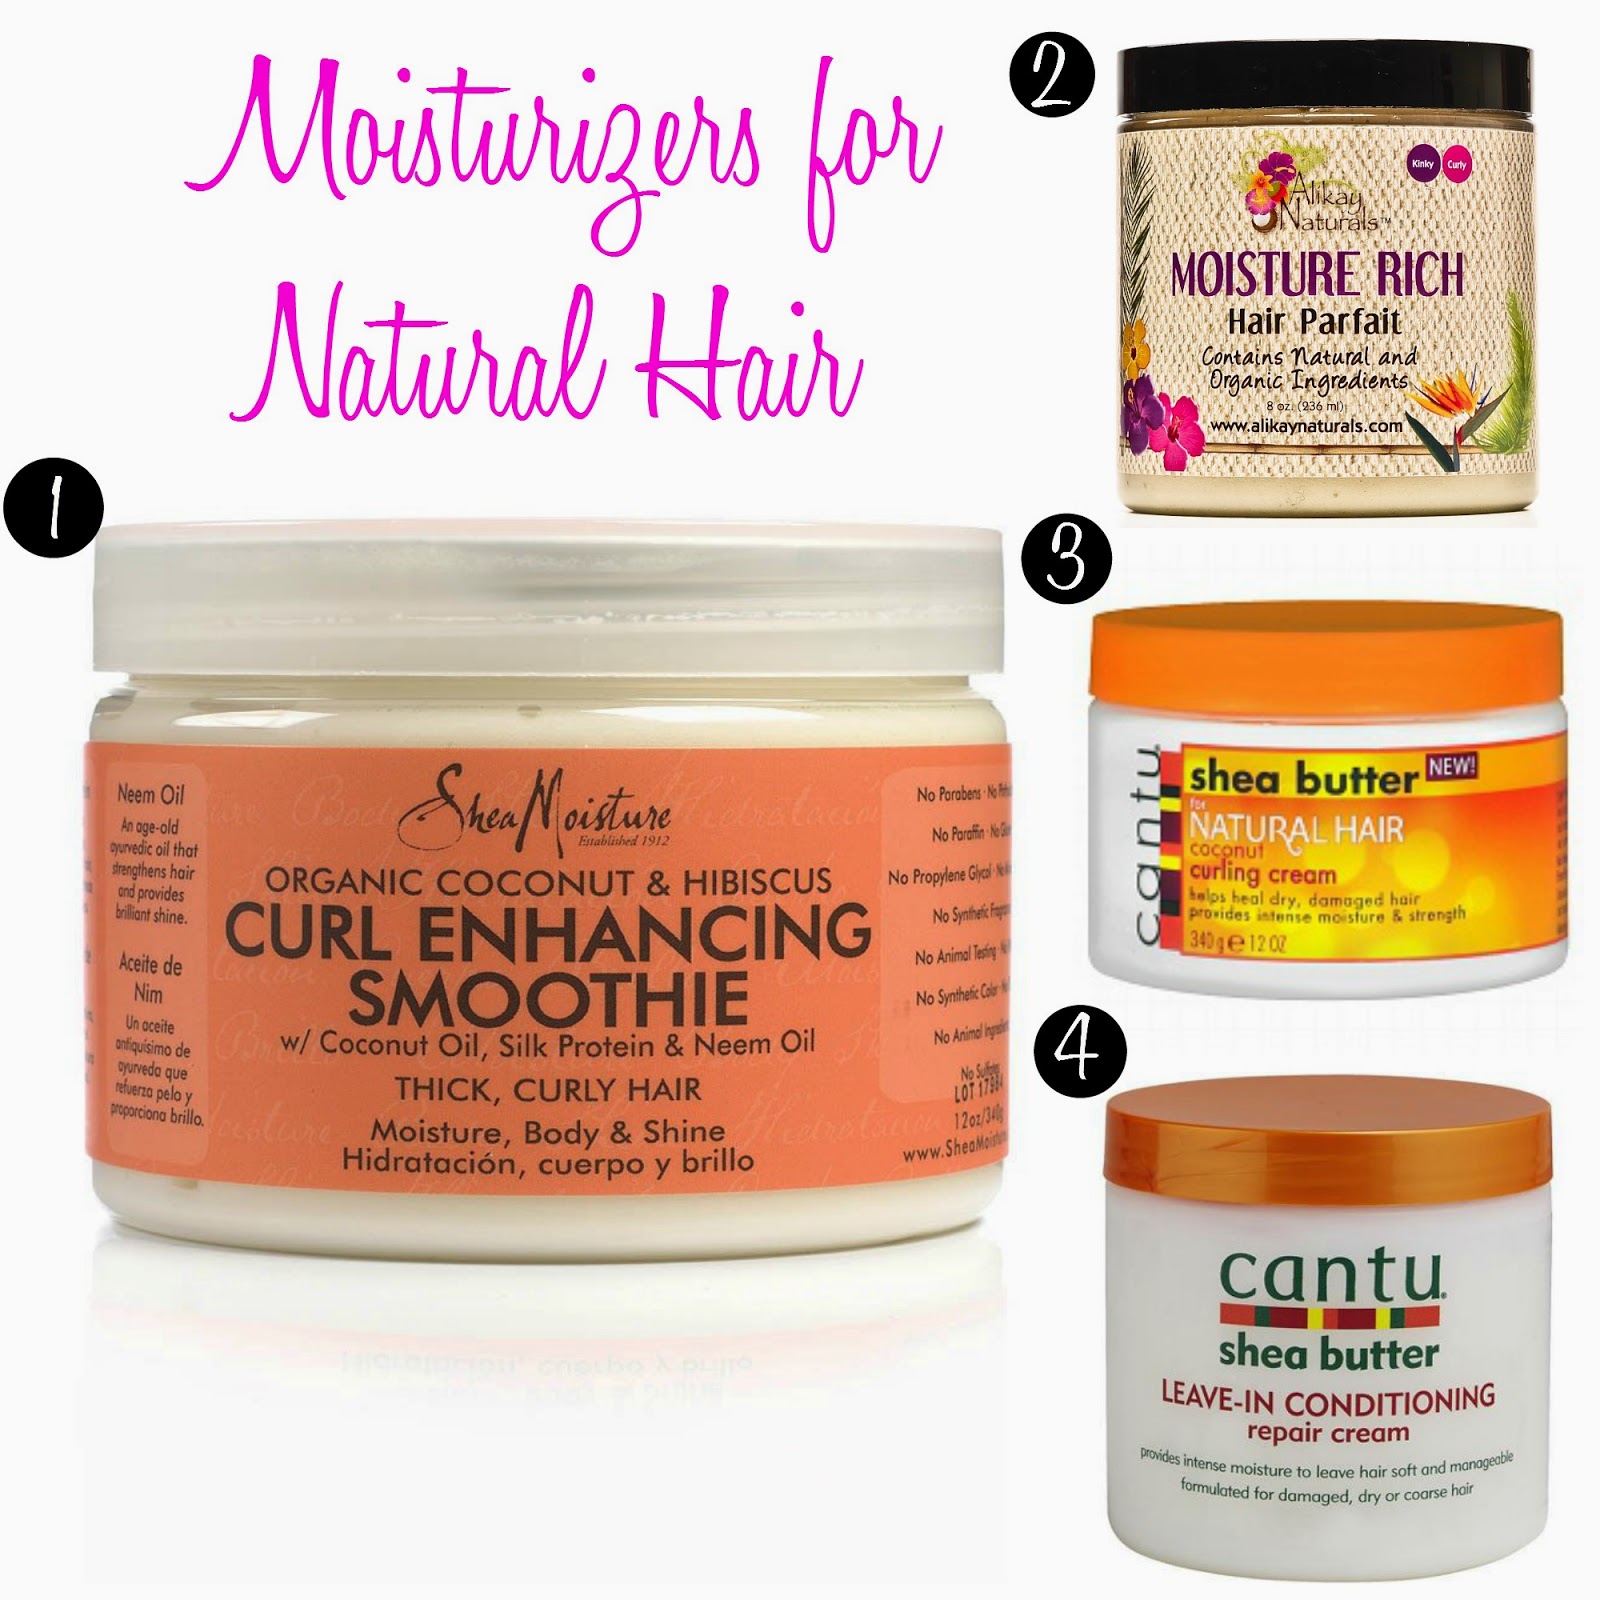 Moisturizers for Natural Hair